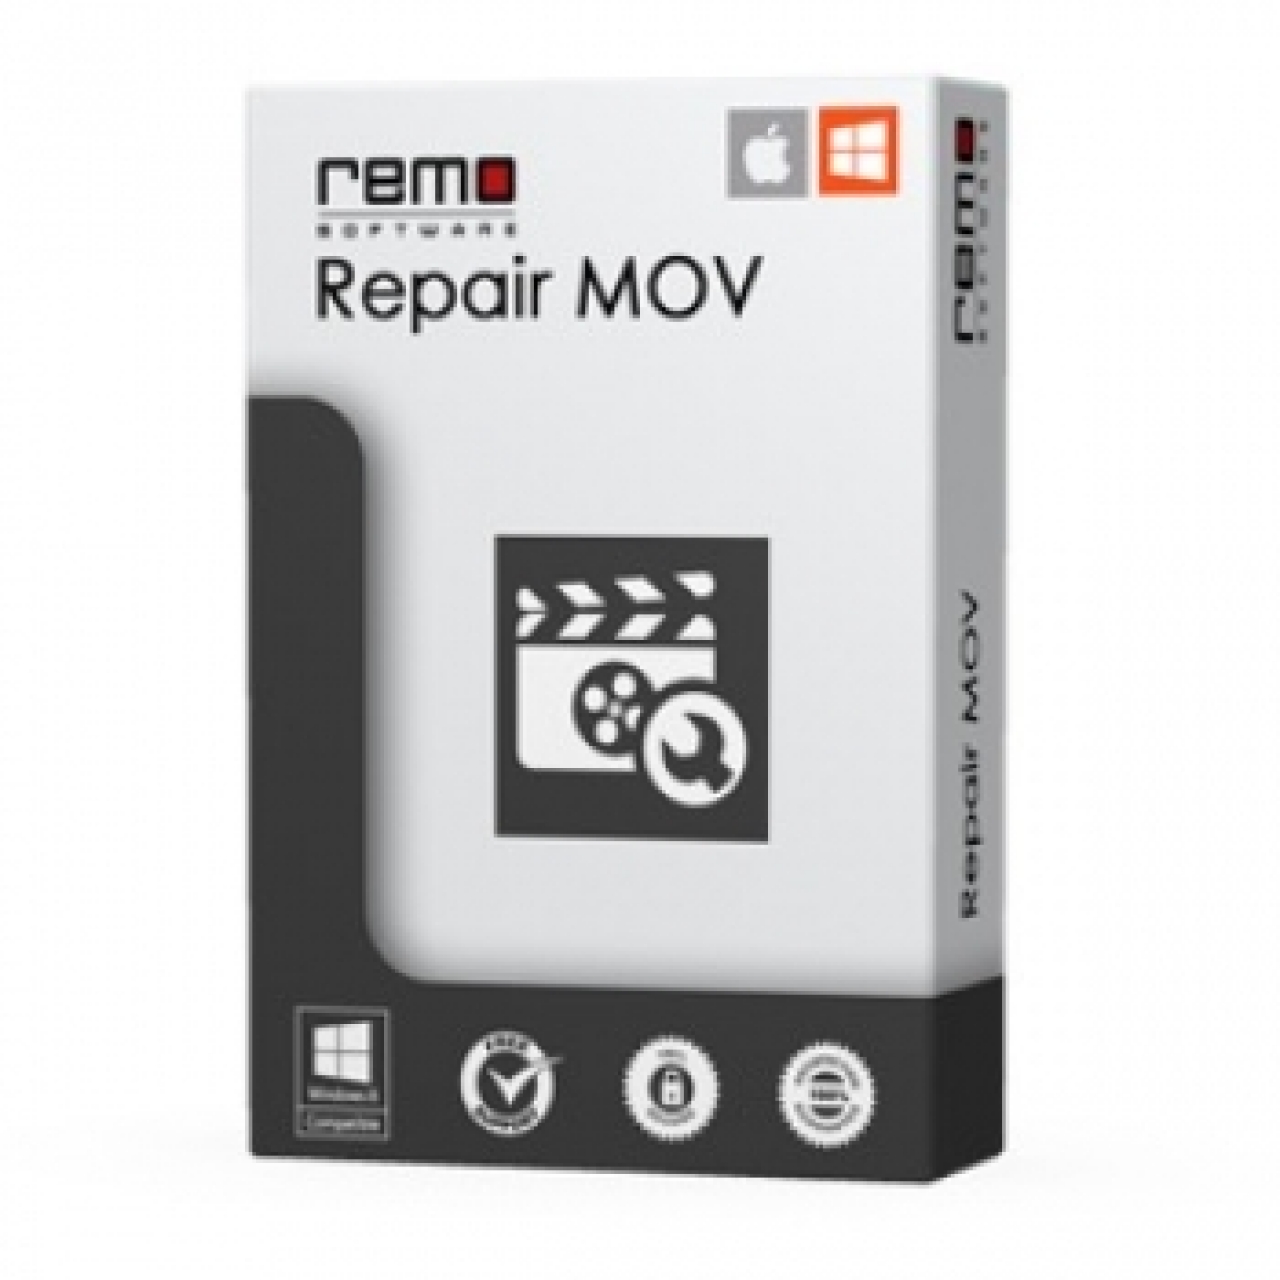 iTWire - Remo MOV & MP4 Video Repair Software - how I fixed my corrupted video